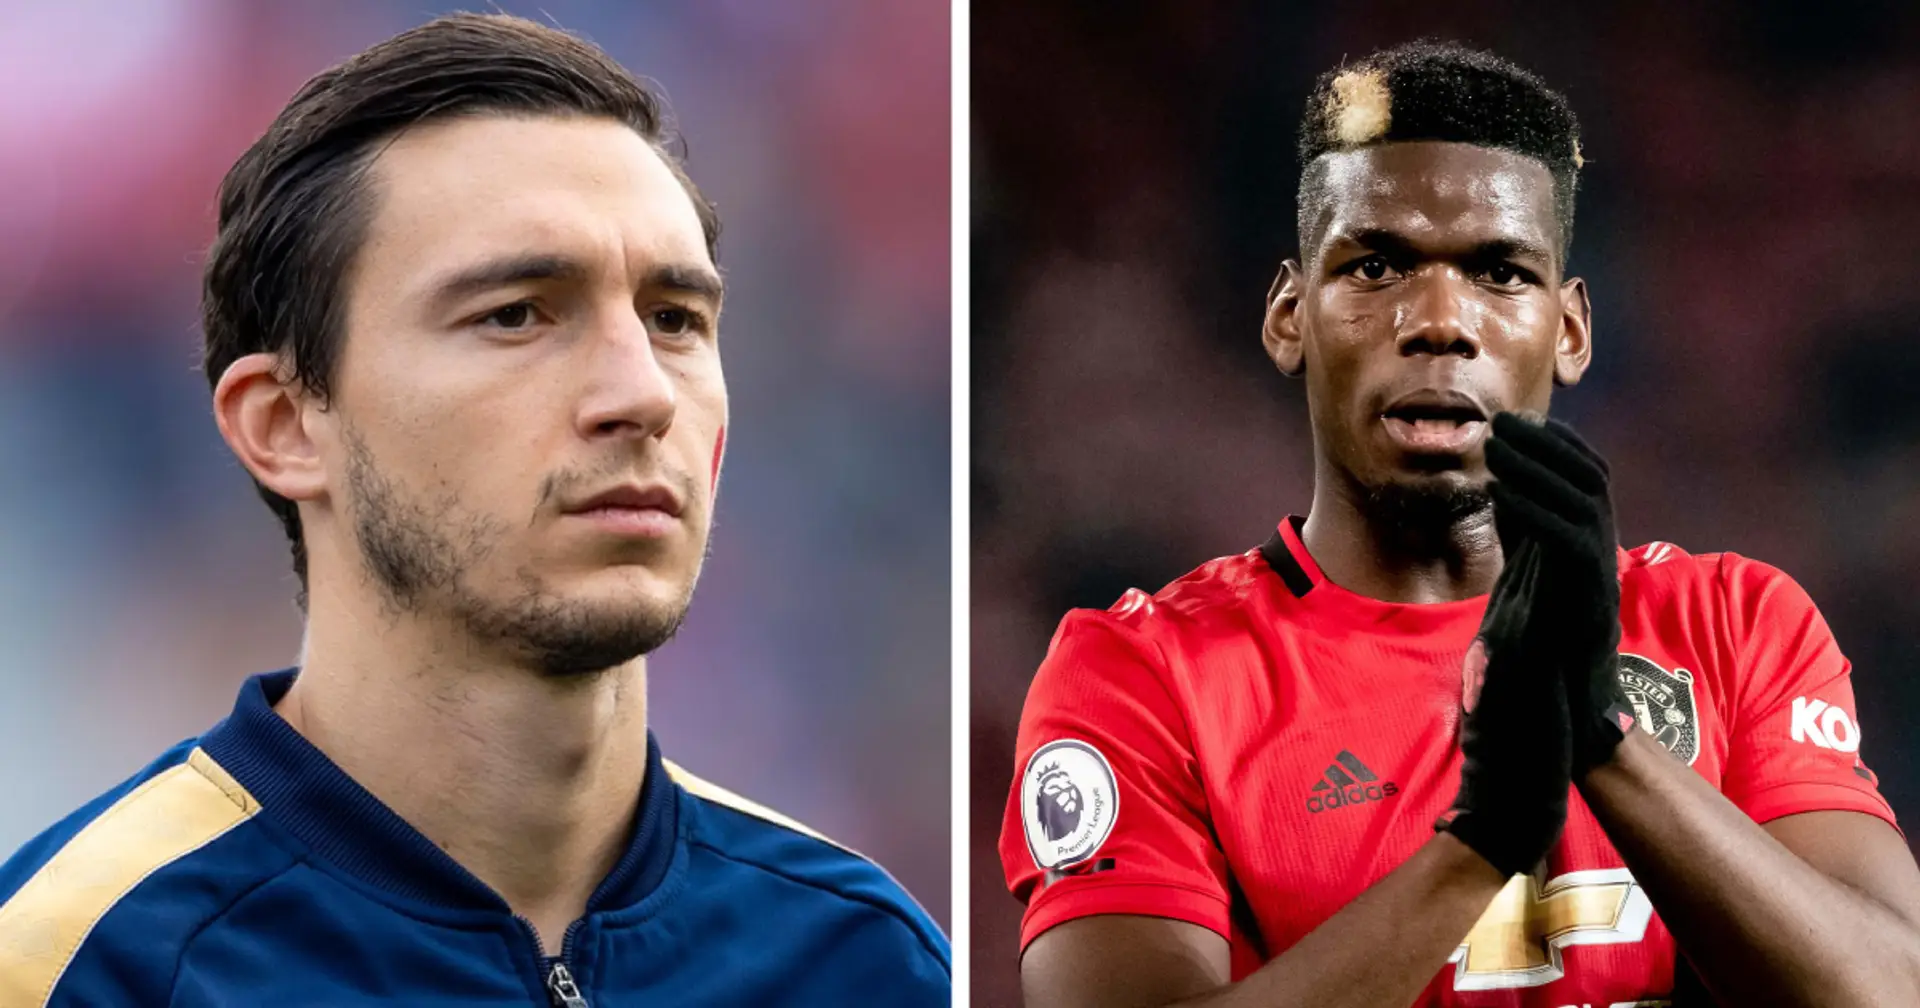 'There has been a lot of unjustified criticism towards Pogba': Matteo Darmian defends his ex-Old Trafford teammate